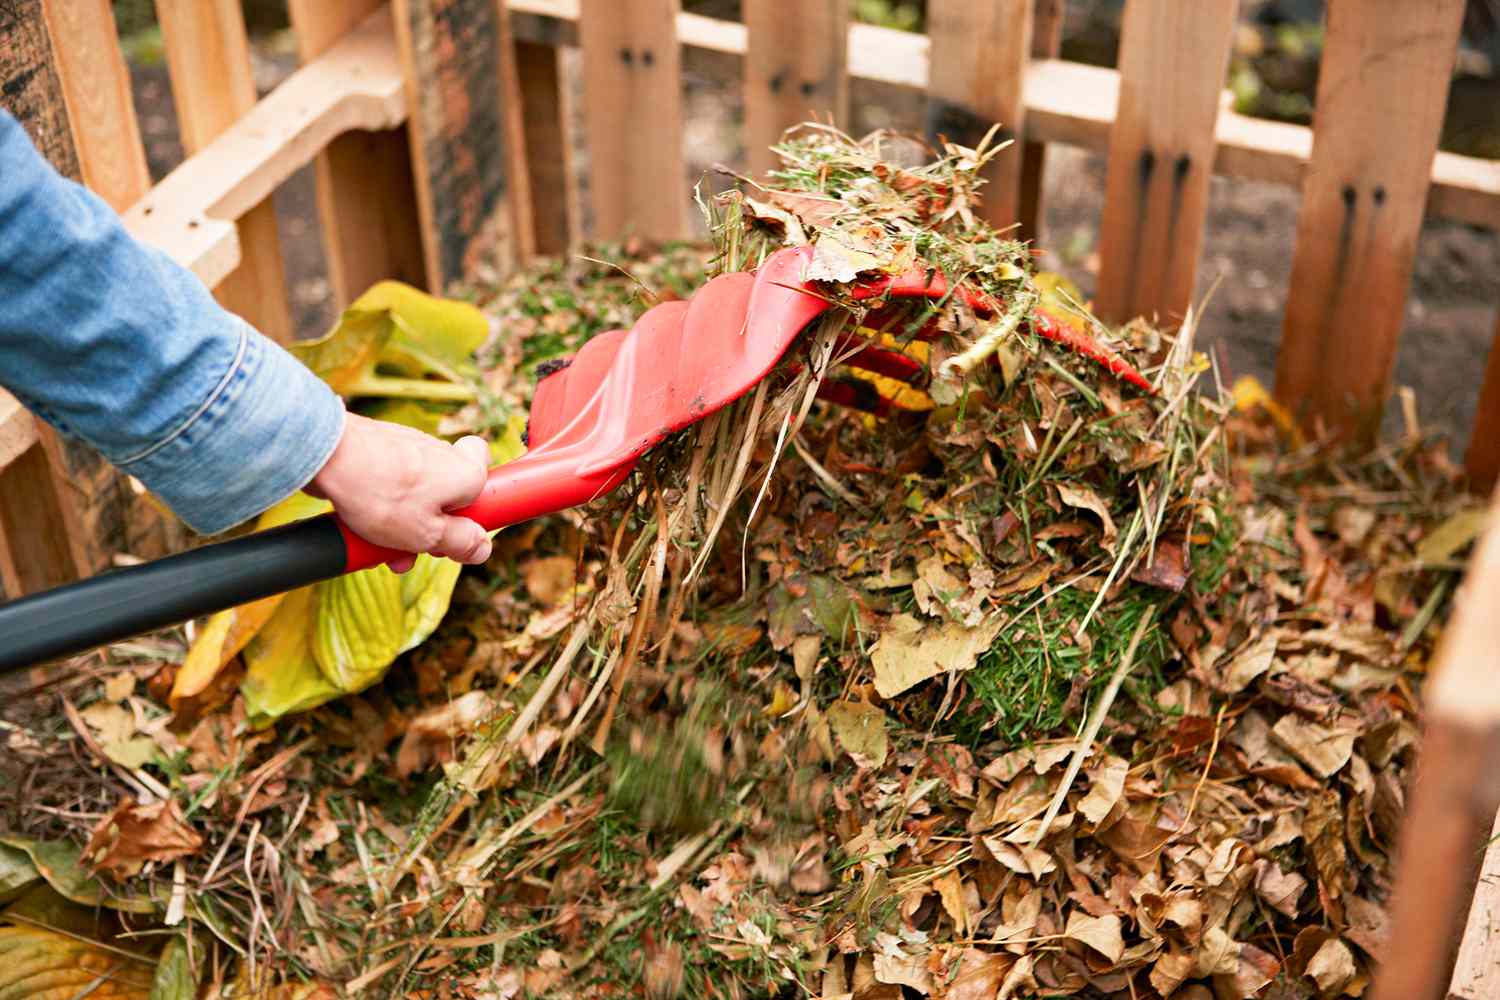 How to compost at home like a pro?